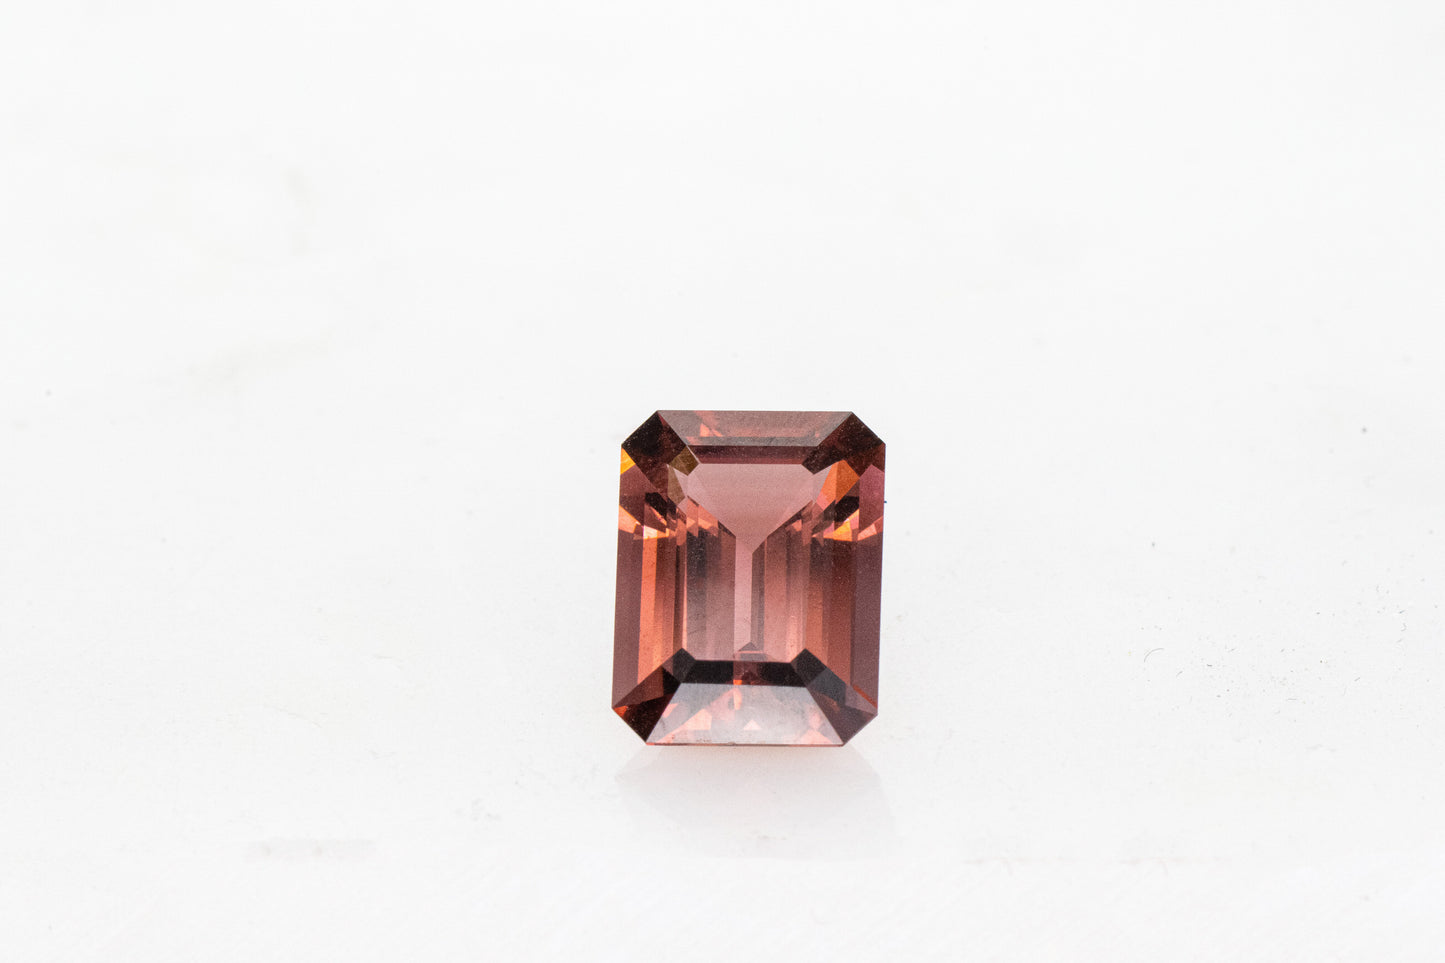 A rectangular shaped Pink Tourmaline Emerald Cut 10.5x7.5mm on a white surface, handmade by Cassin Jewelry.